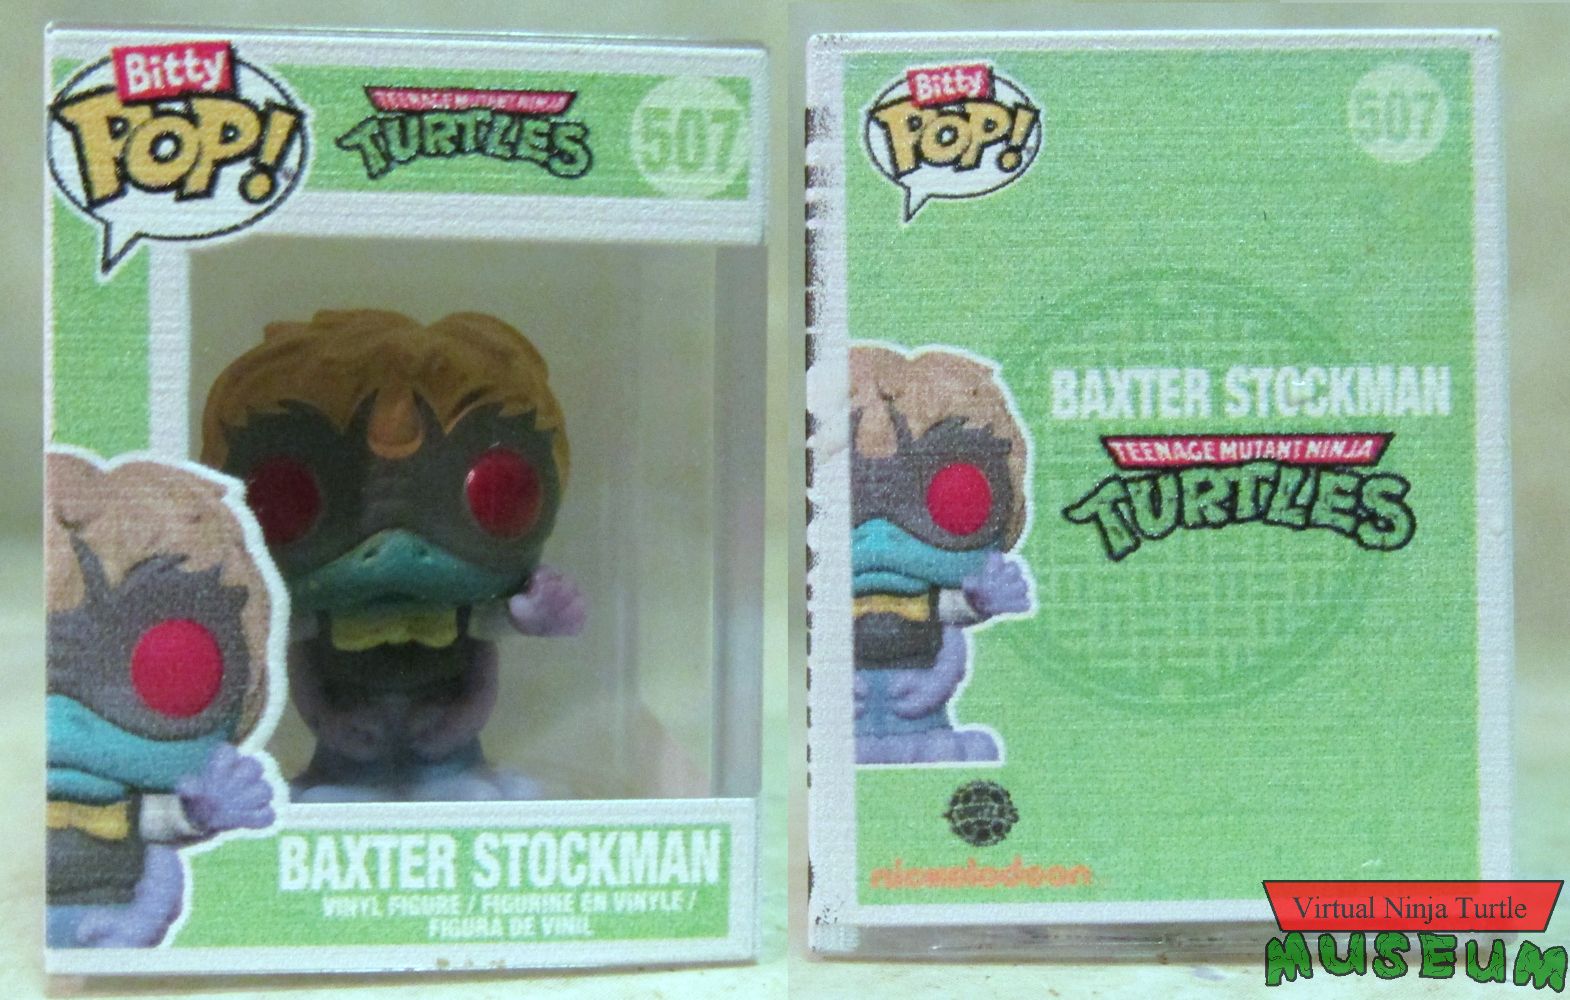 Baxter Stockman in case front and back